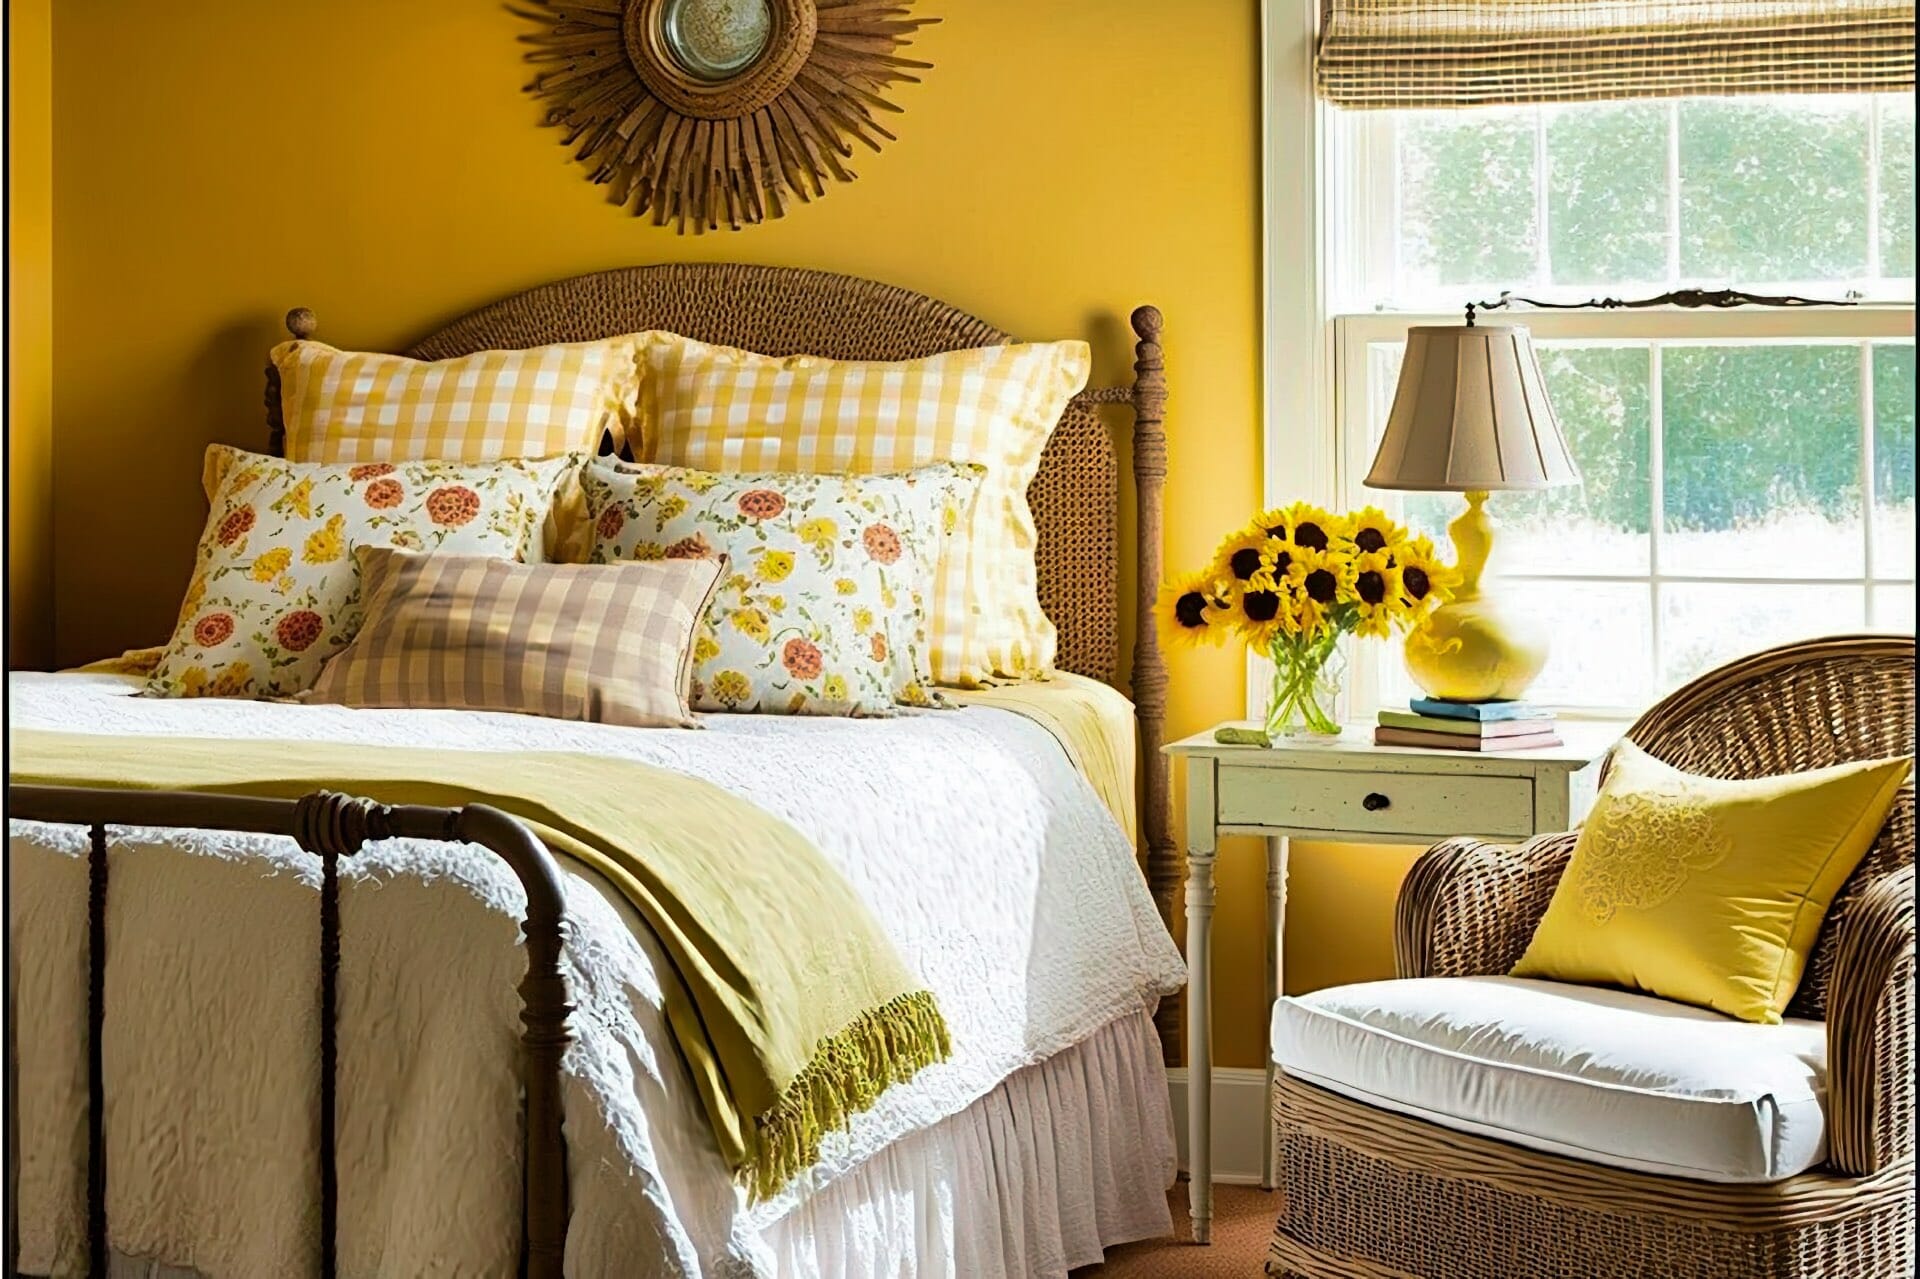 Country Style Bedroom With A Welcoming And Inviting Feel, Thanks To The Warm Yellow Walls And Cozy Furnishings. A Twin Size Bed With A Simple White Headboard Is Dressed In A Cheerful Sunflower Yellow Comforter, And A Collection Of Patterned Throw Pillows Add A Pop Of Color. A Matching Yellow Nightstand With A White Lamp Sits Beside The Bed, And A Wicker Armchair With A Fluffy Cushion Provides A Cozy Seating Option. A Braided Rug In Shades Of Yellow And White Anchors The Space, And A Collection Of Framed Vintage Posters Adds A Touch Of Whimsy.